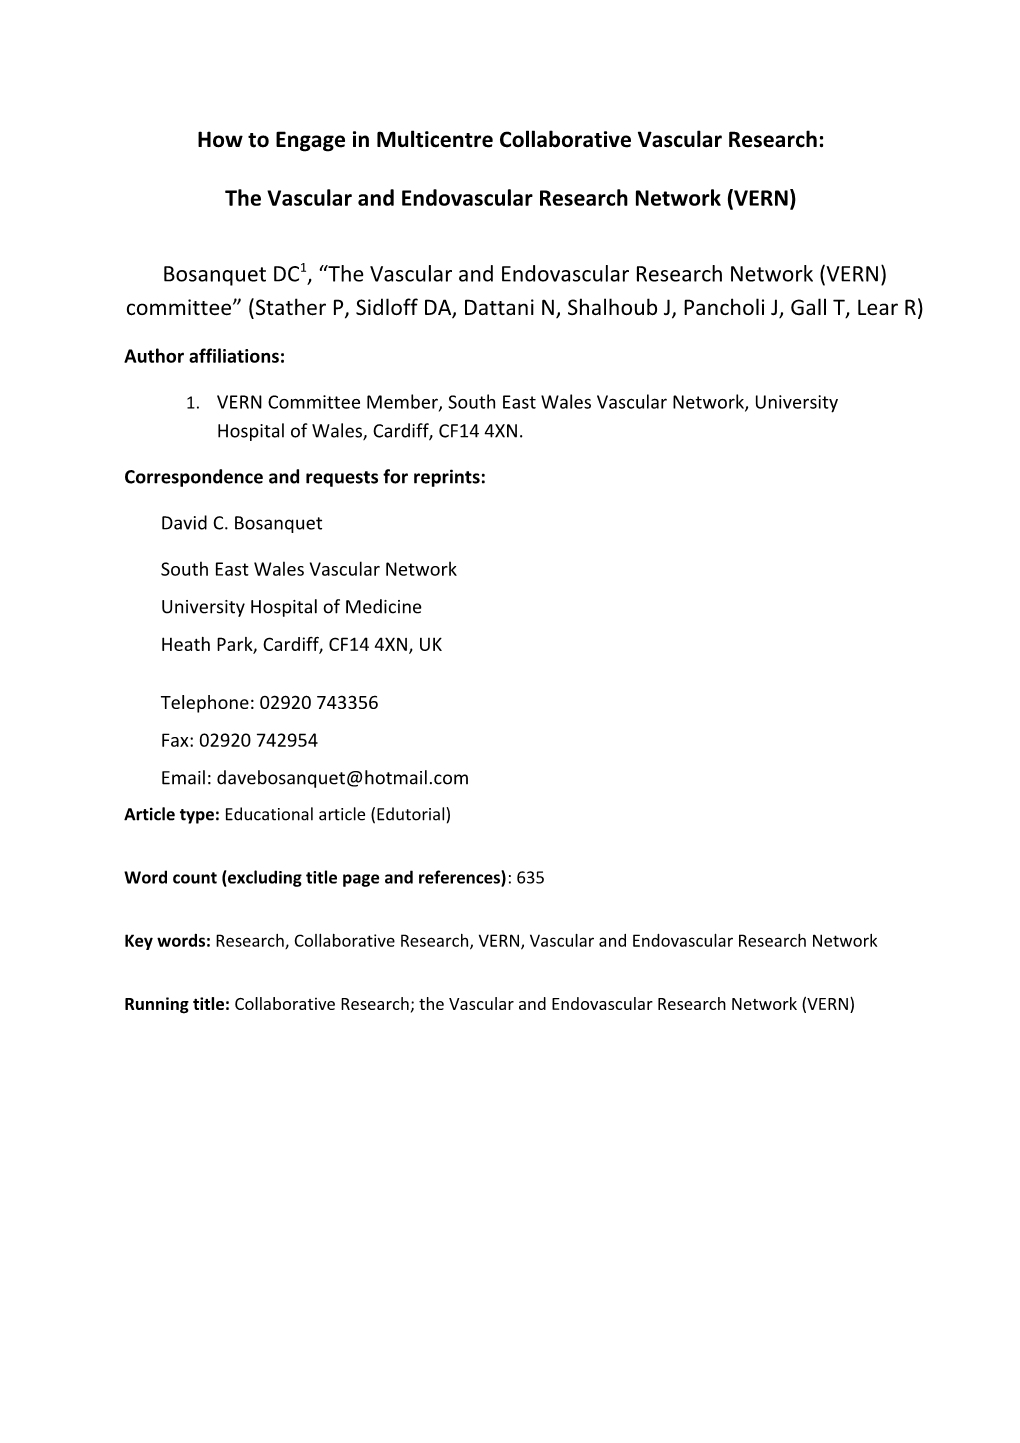 Collaborative Vascular Research Within the UK: the Vascular and Endovascular Research Network